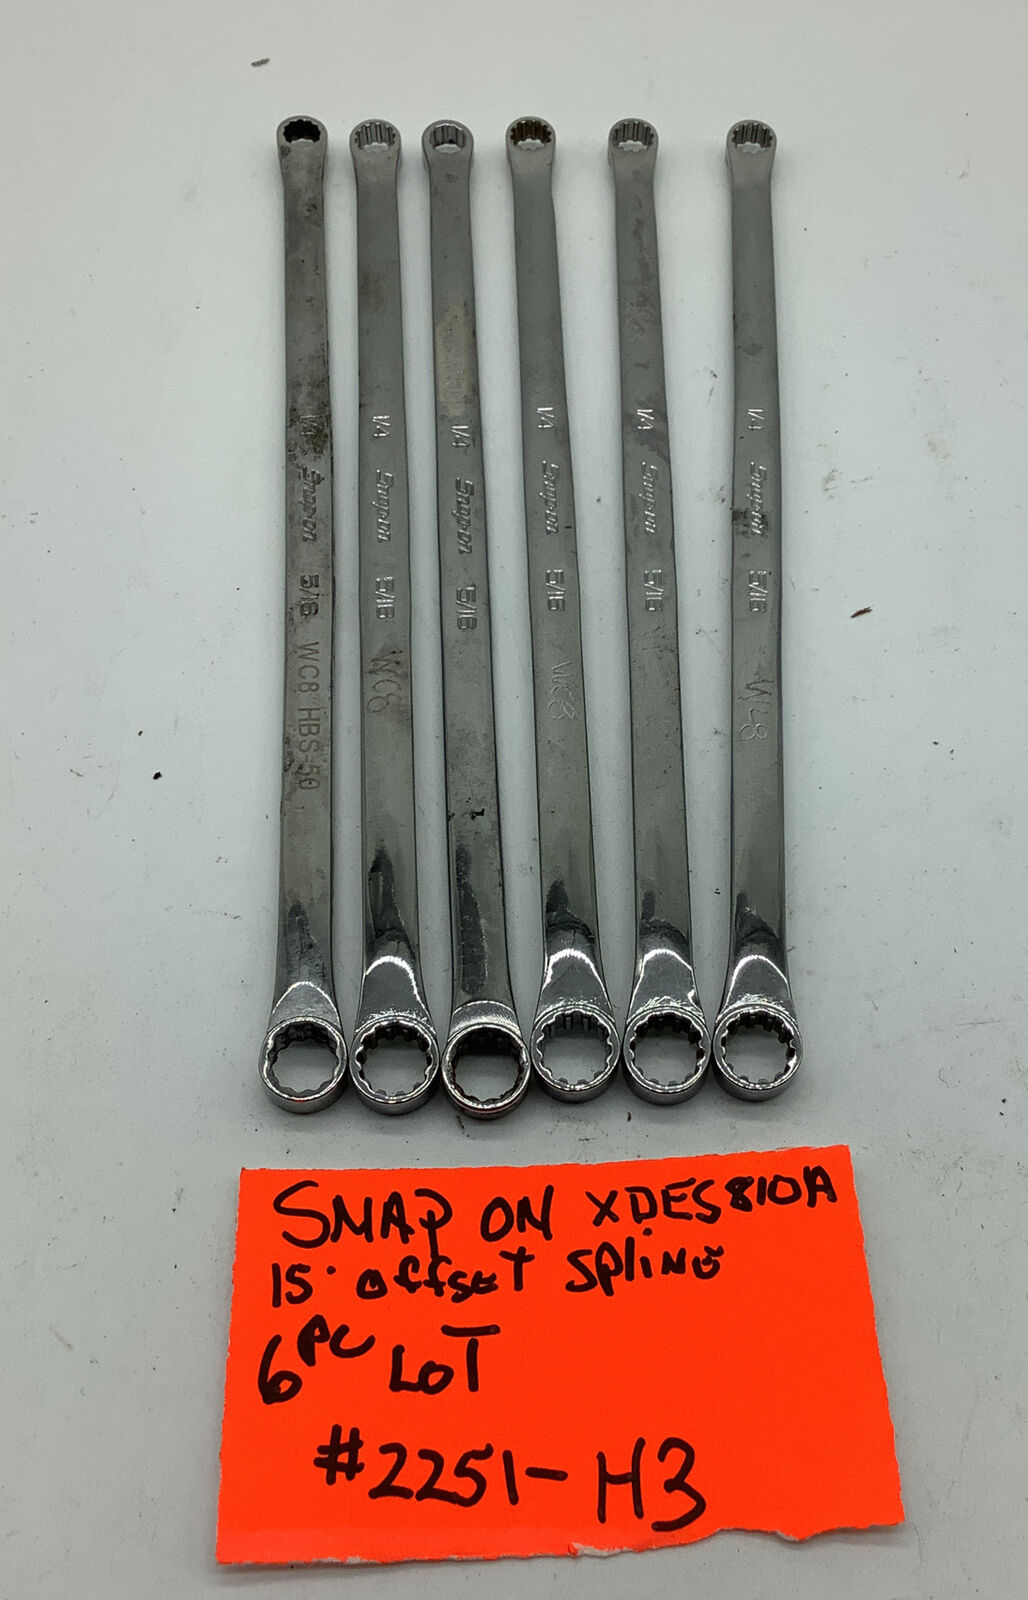 Snap Inexpensive On offset spline wrench XDES810A 1 4 5 Over item handling ☆ X 16 Pc 6 H 2251-